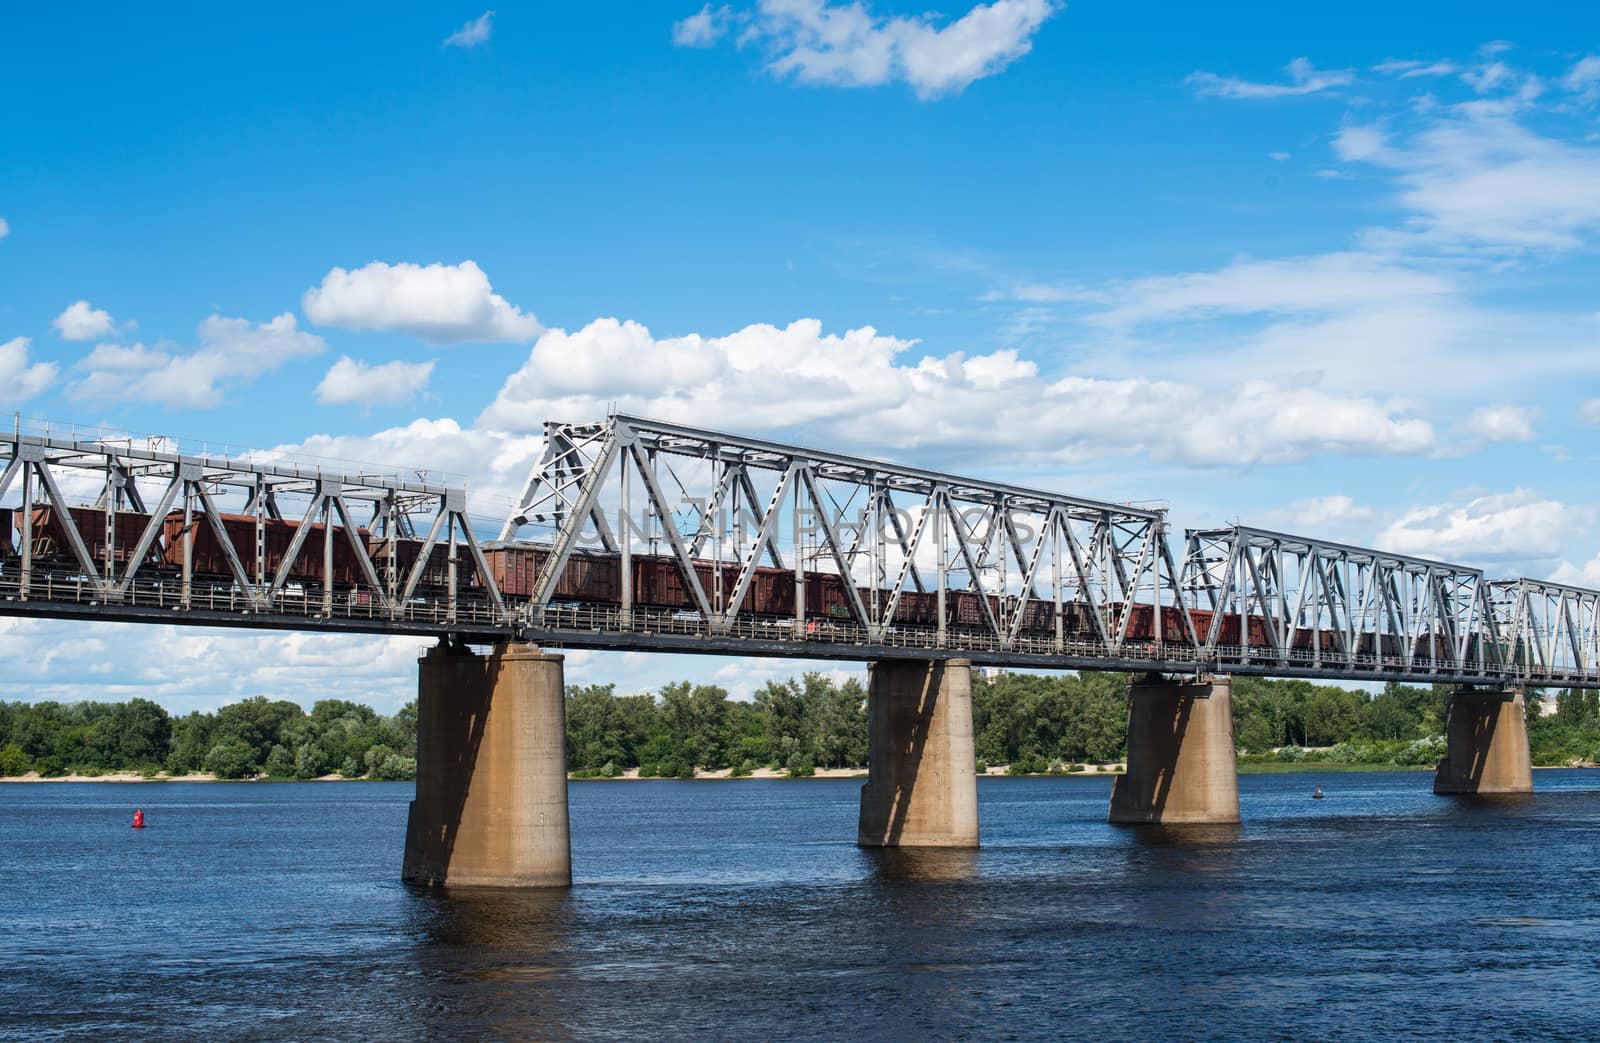 Railroad bridge in Kyiv across the Dnieper with freight train by rootstocks